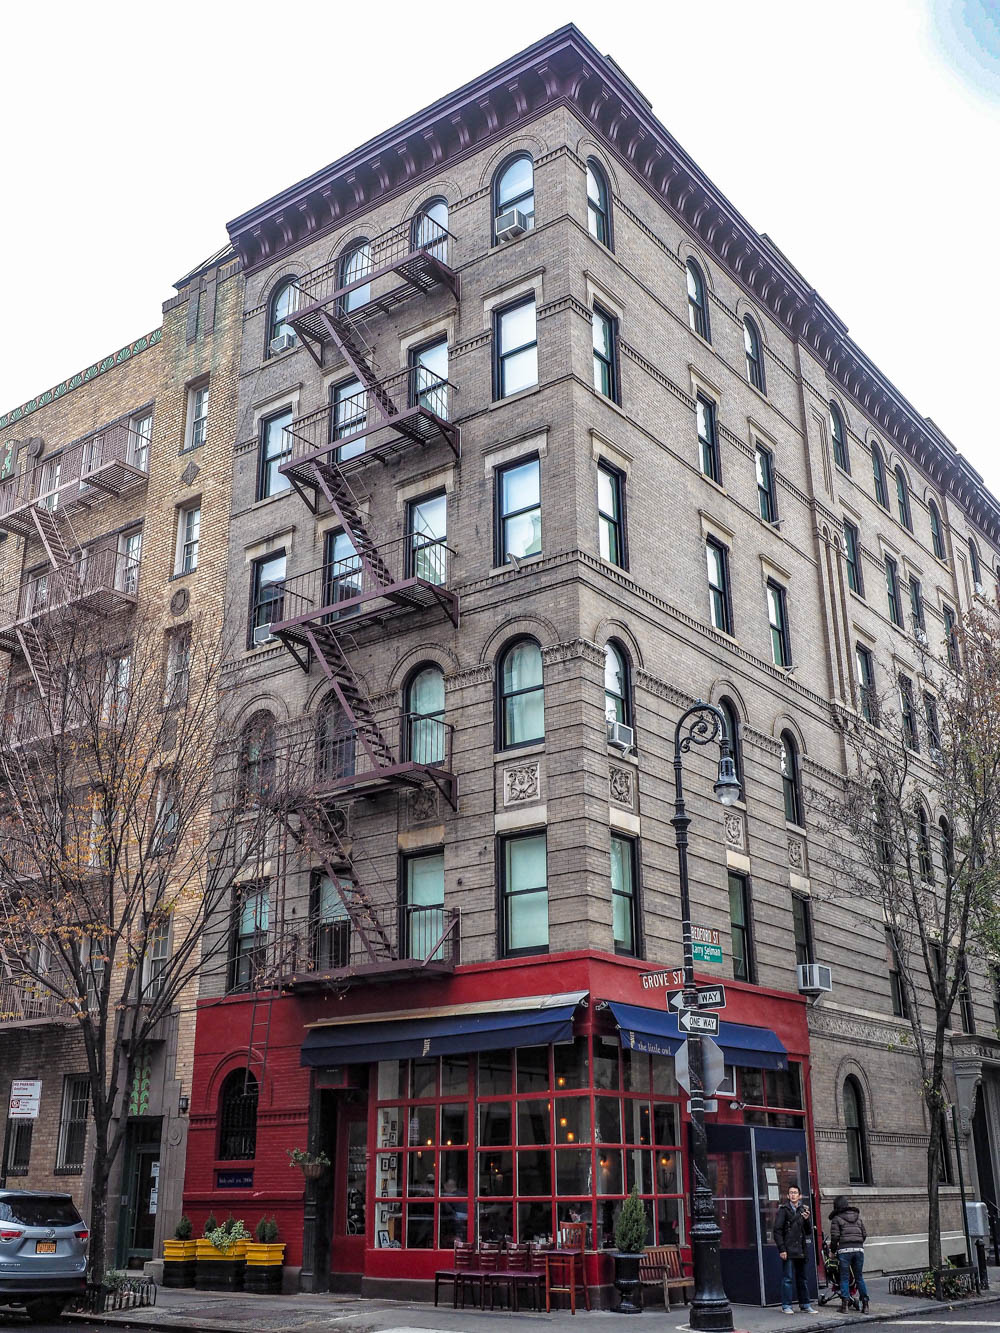 exterior of the apartment from the sitcom Friends